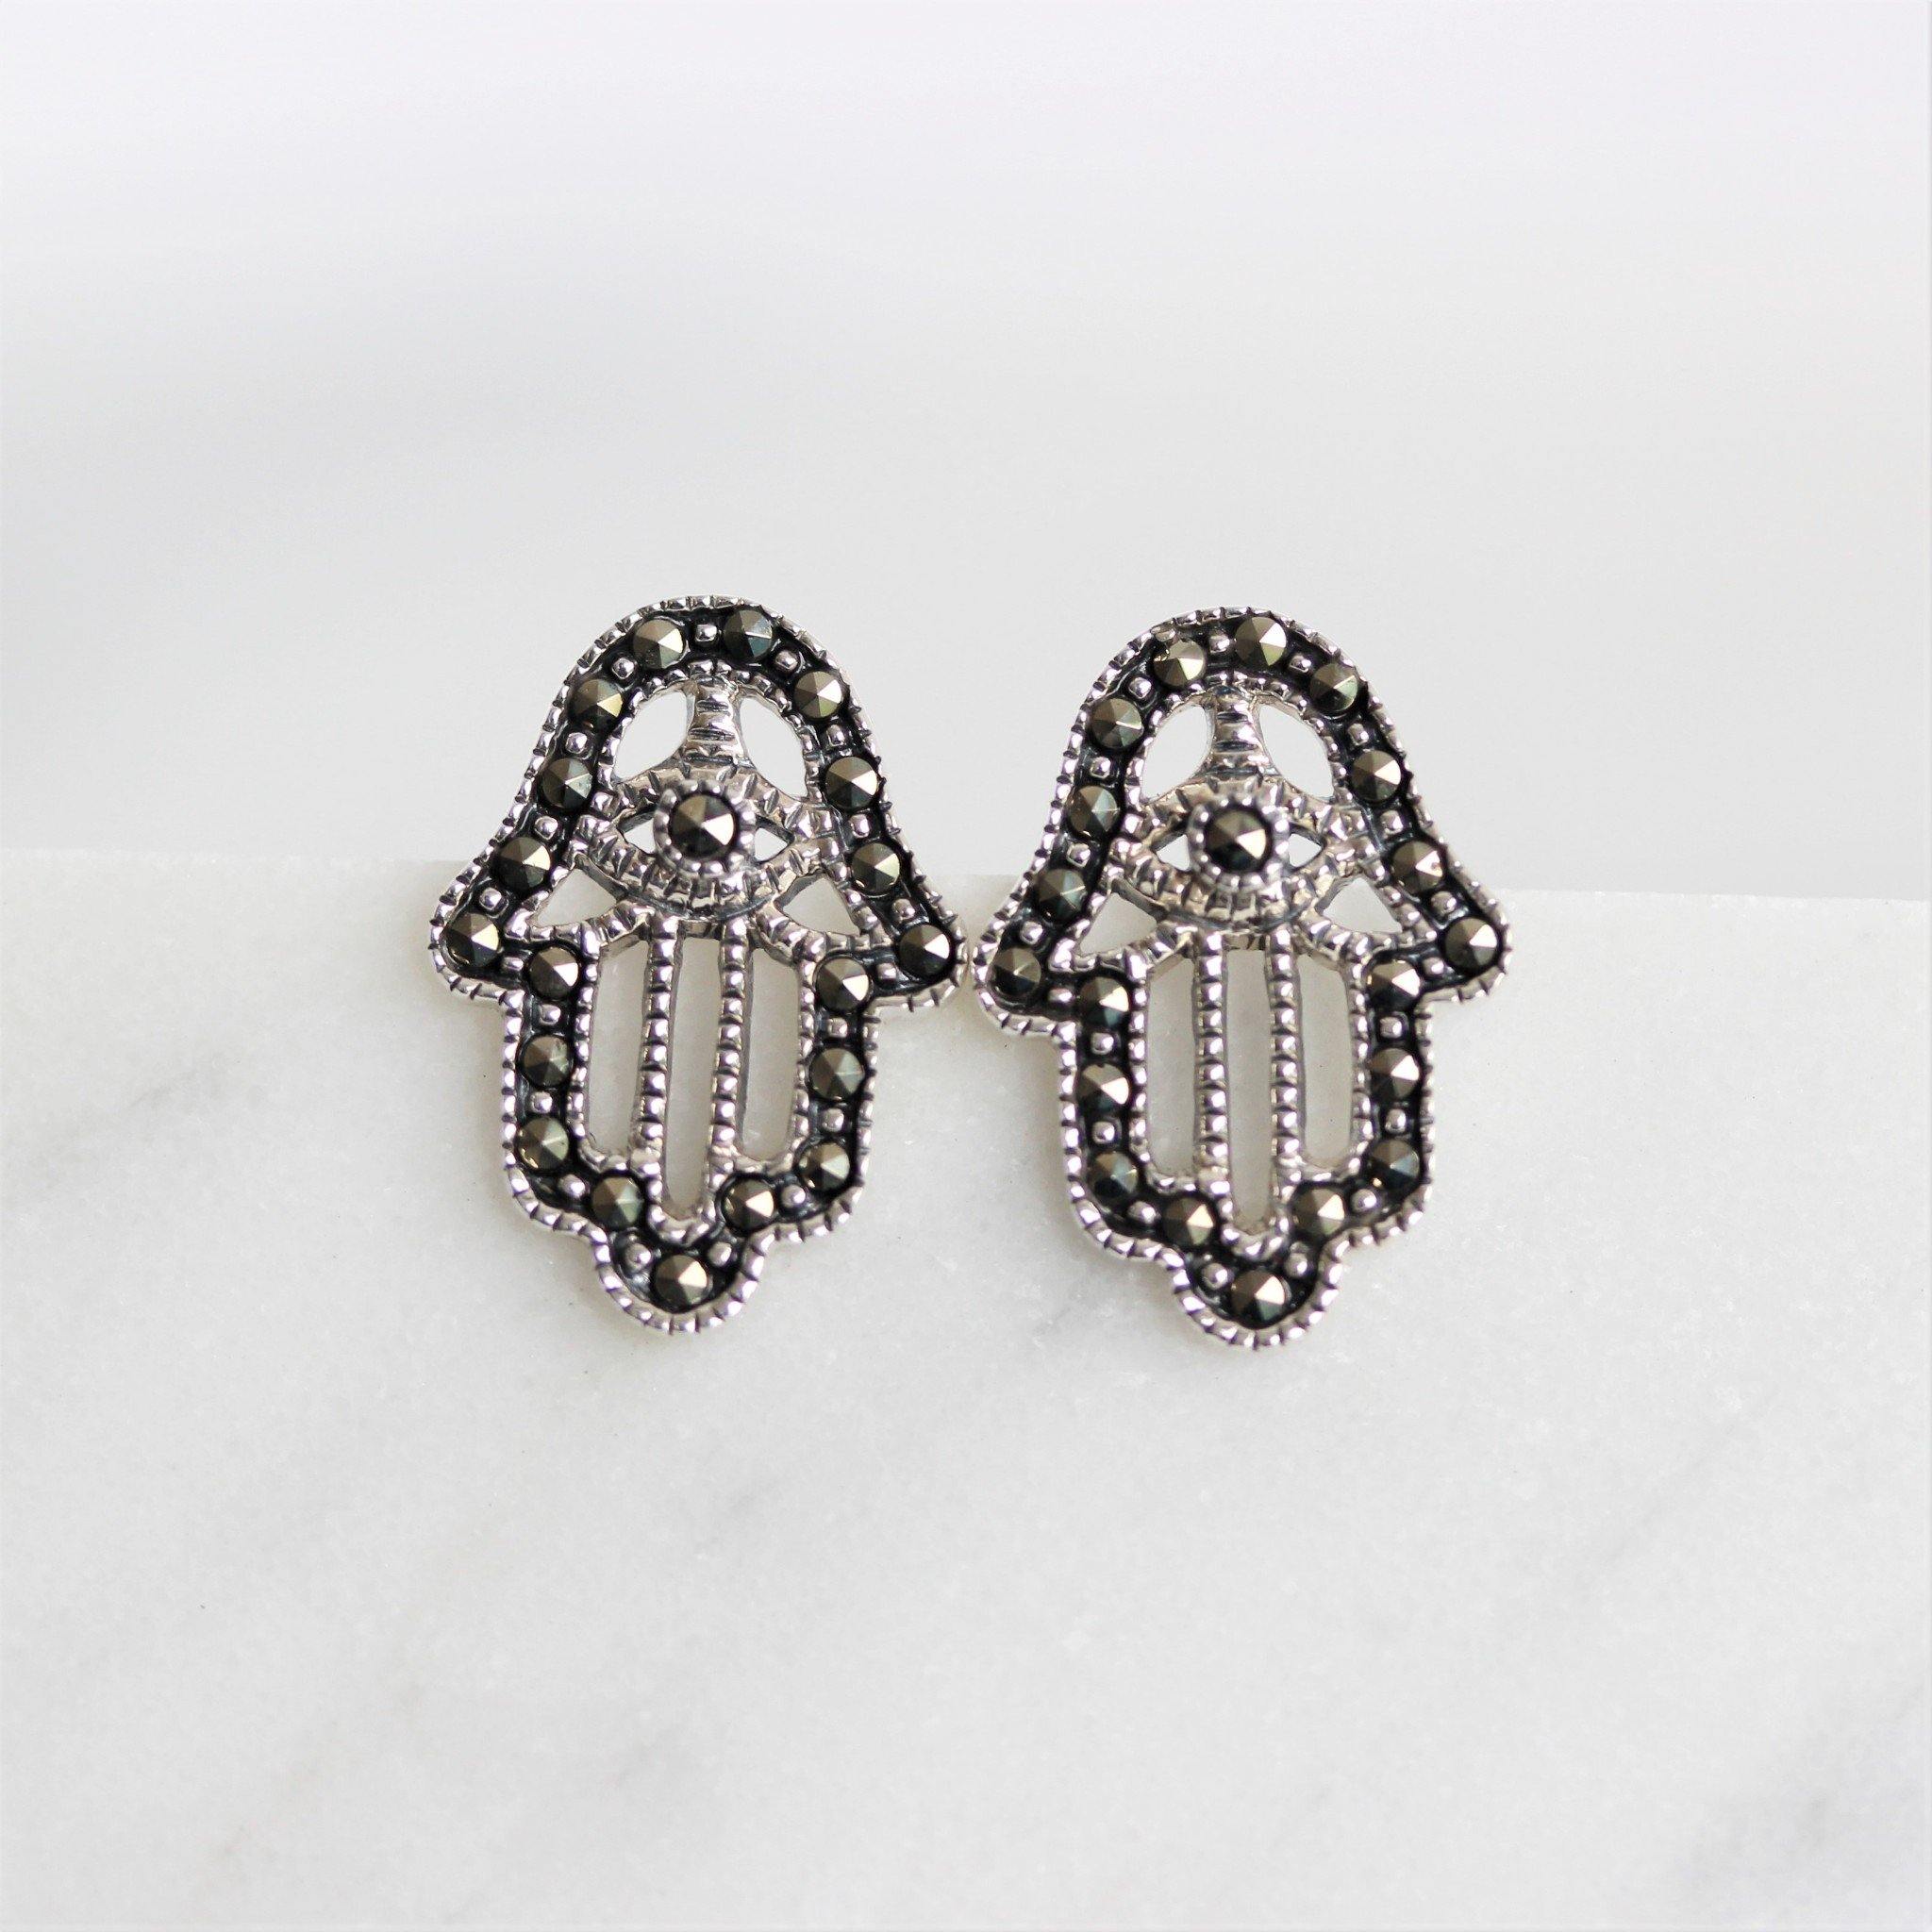 Sterling Silver 925 Marcasite Vintage Style Cut Out Hamsa Hand Stud Earrings - STERLING SILVER DESIGNS